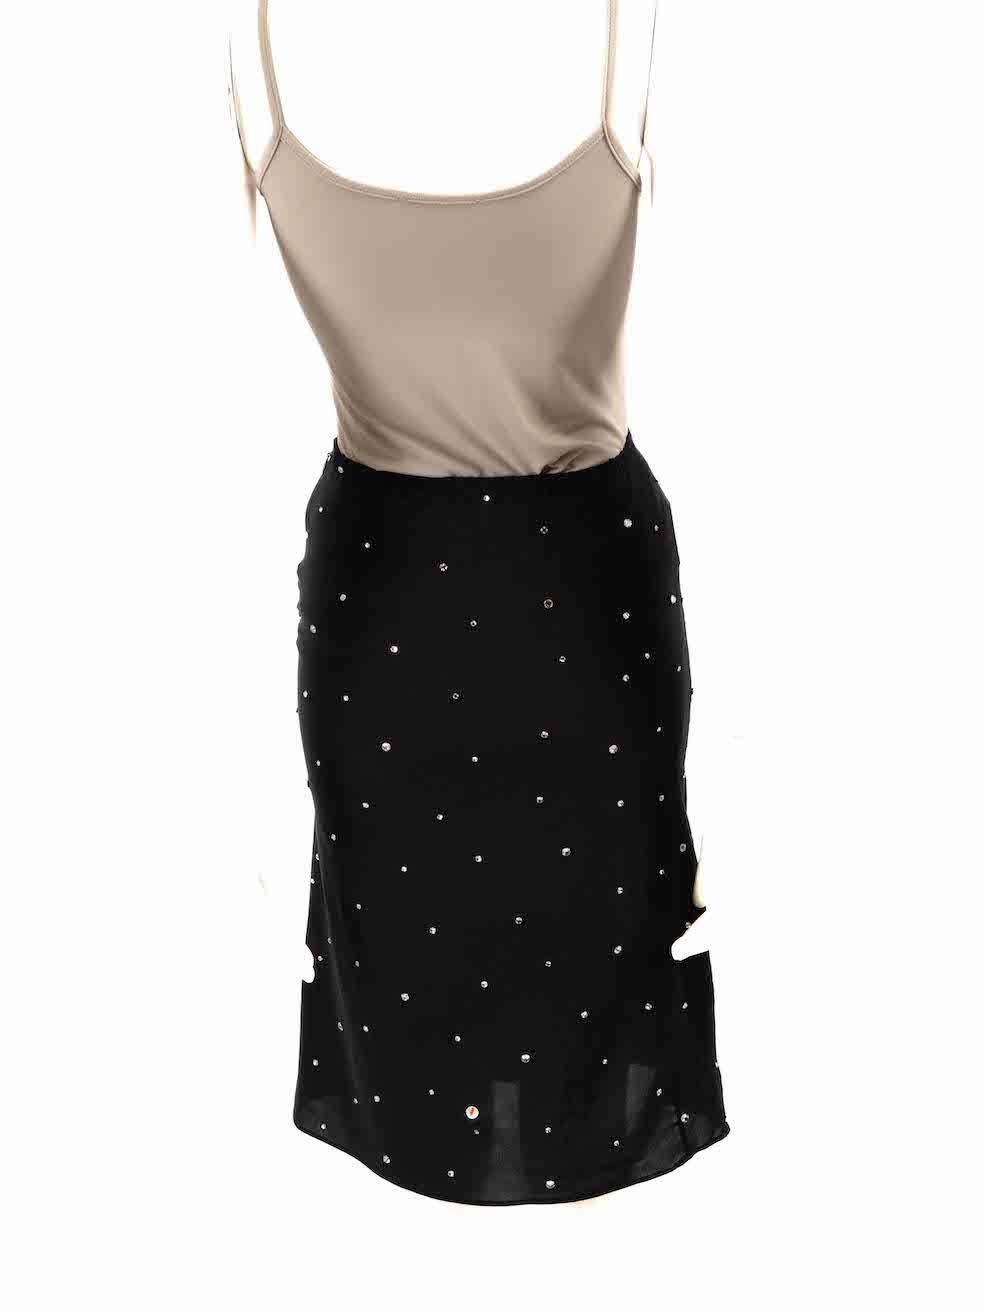 Miu Miu Black Crystal Embellished Skirt Size XS In Excellent Condition For Sale In London, GB